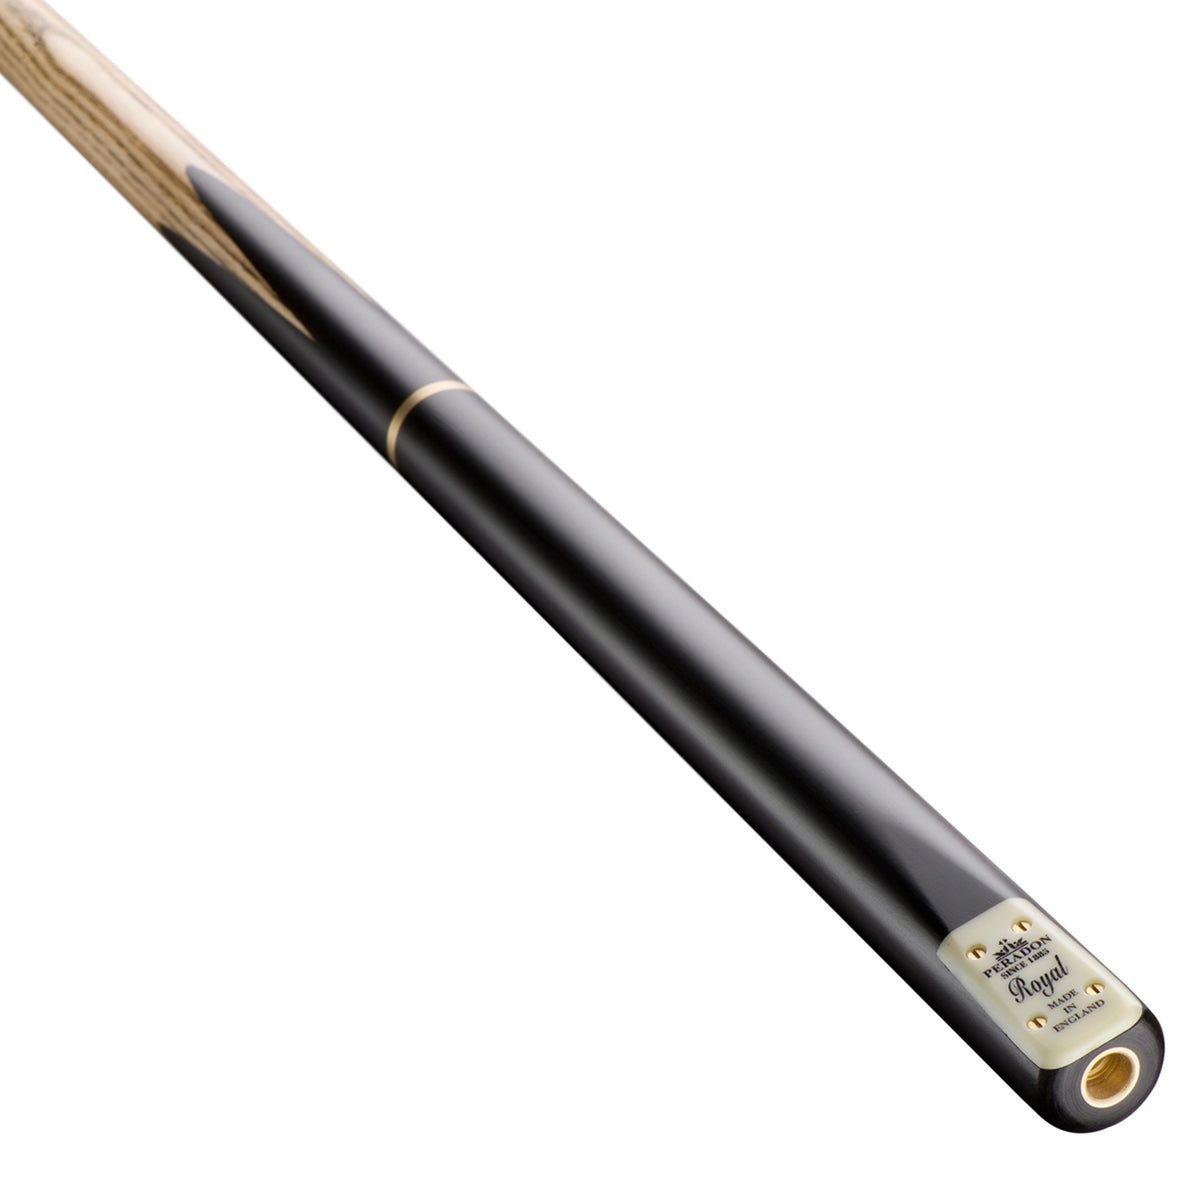 Peradon Royal 3/4 Jointed Snooker Cue. On angle view